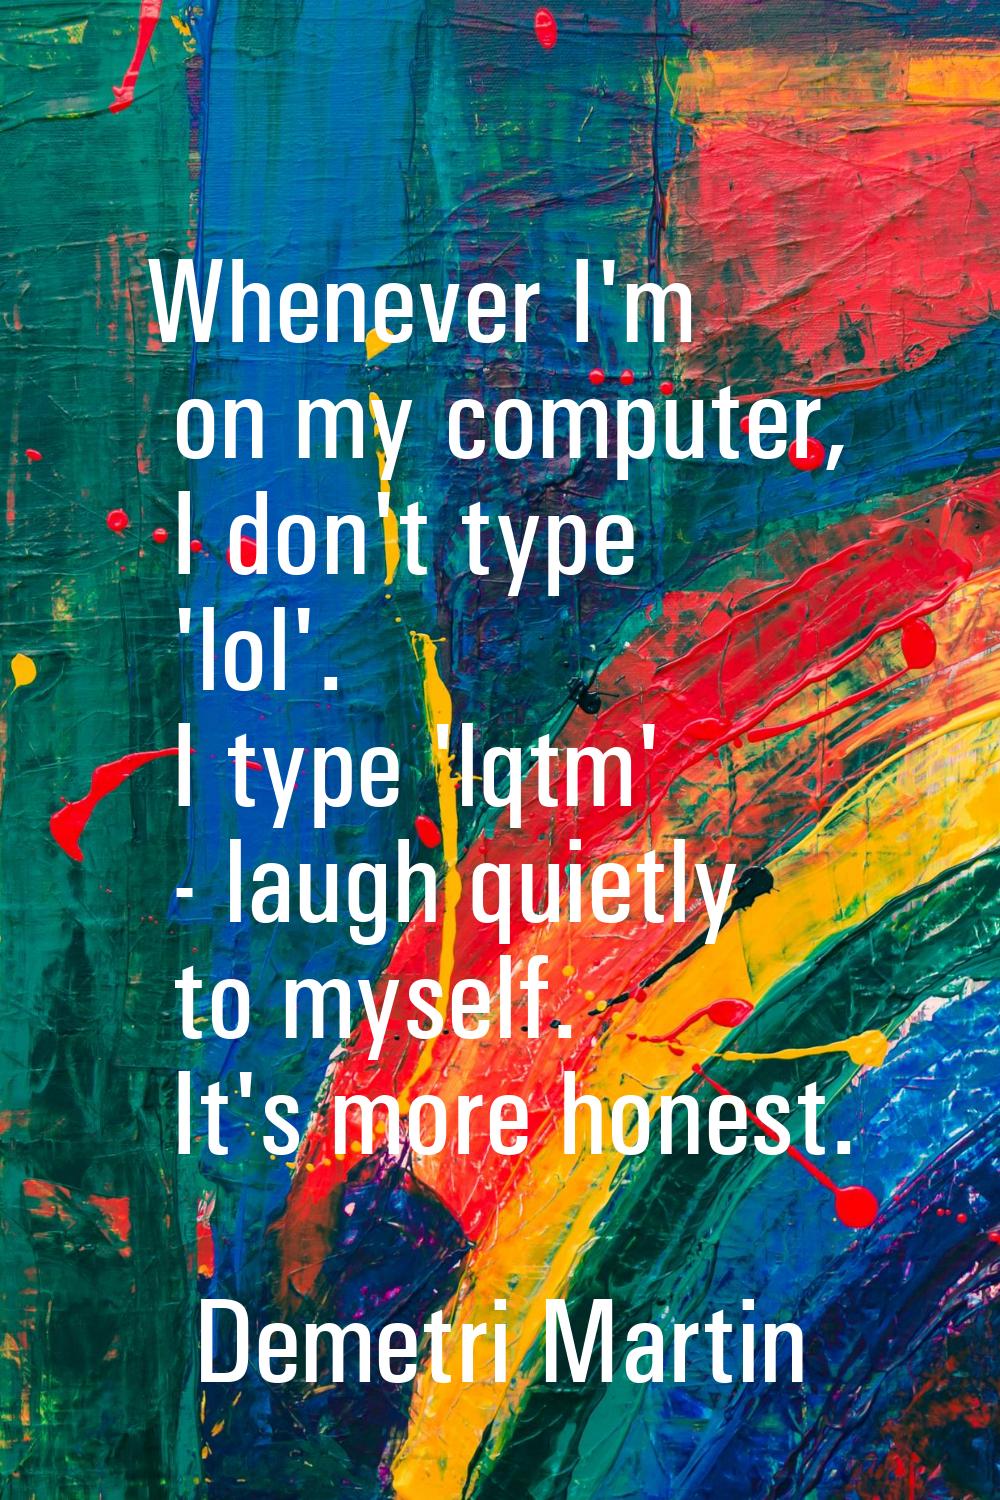 Whenever I'm on my computer, I don't type 'lol'. I type 'lqtm' - laugh quietly to myself. It's more